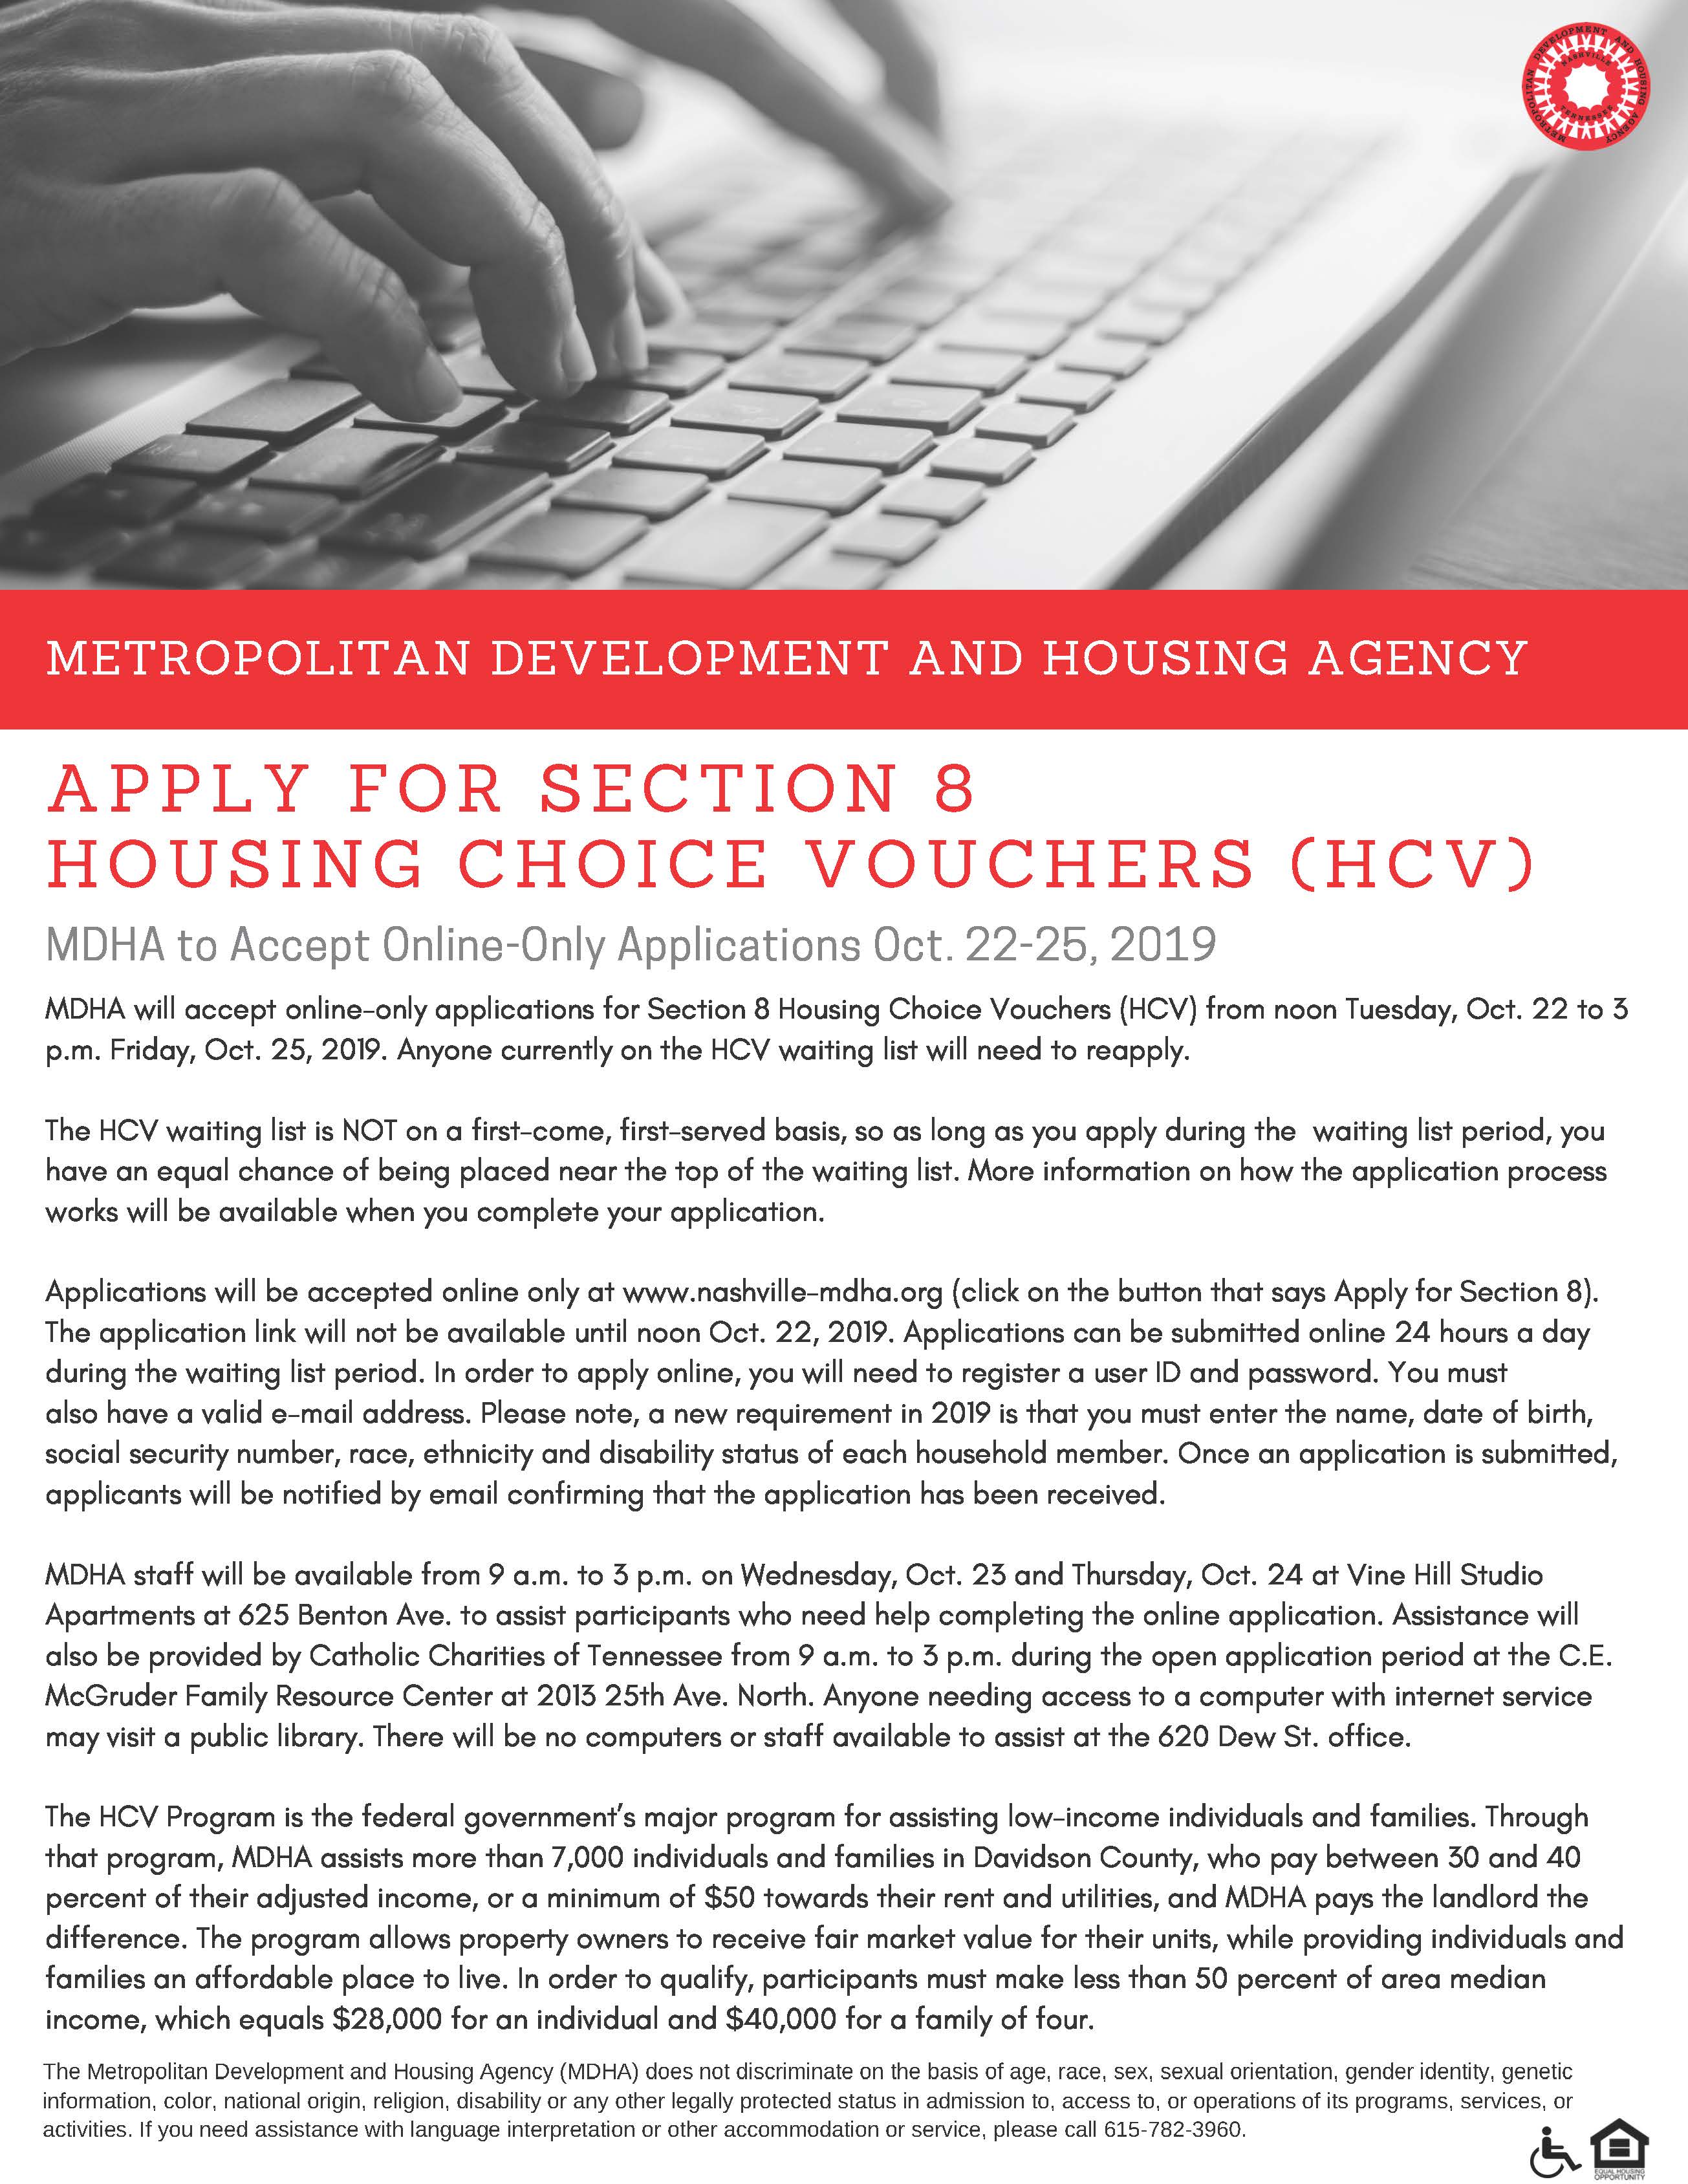 apply-for-section-8-housing-choice-vouchers-10222019-final